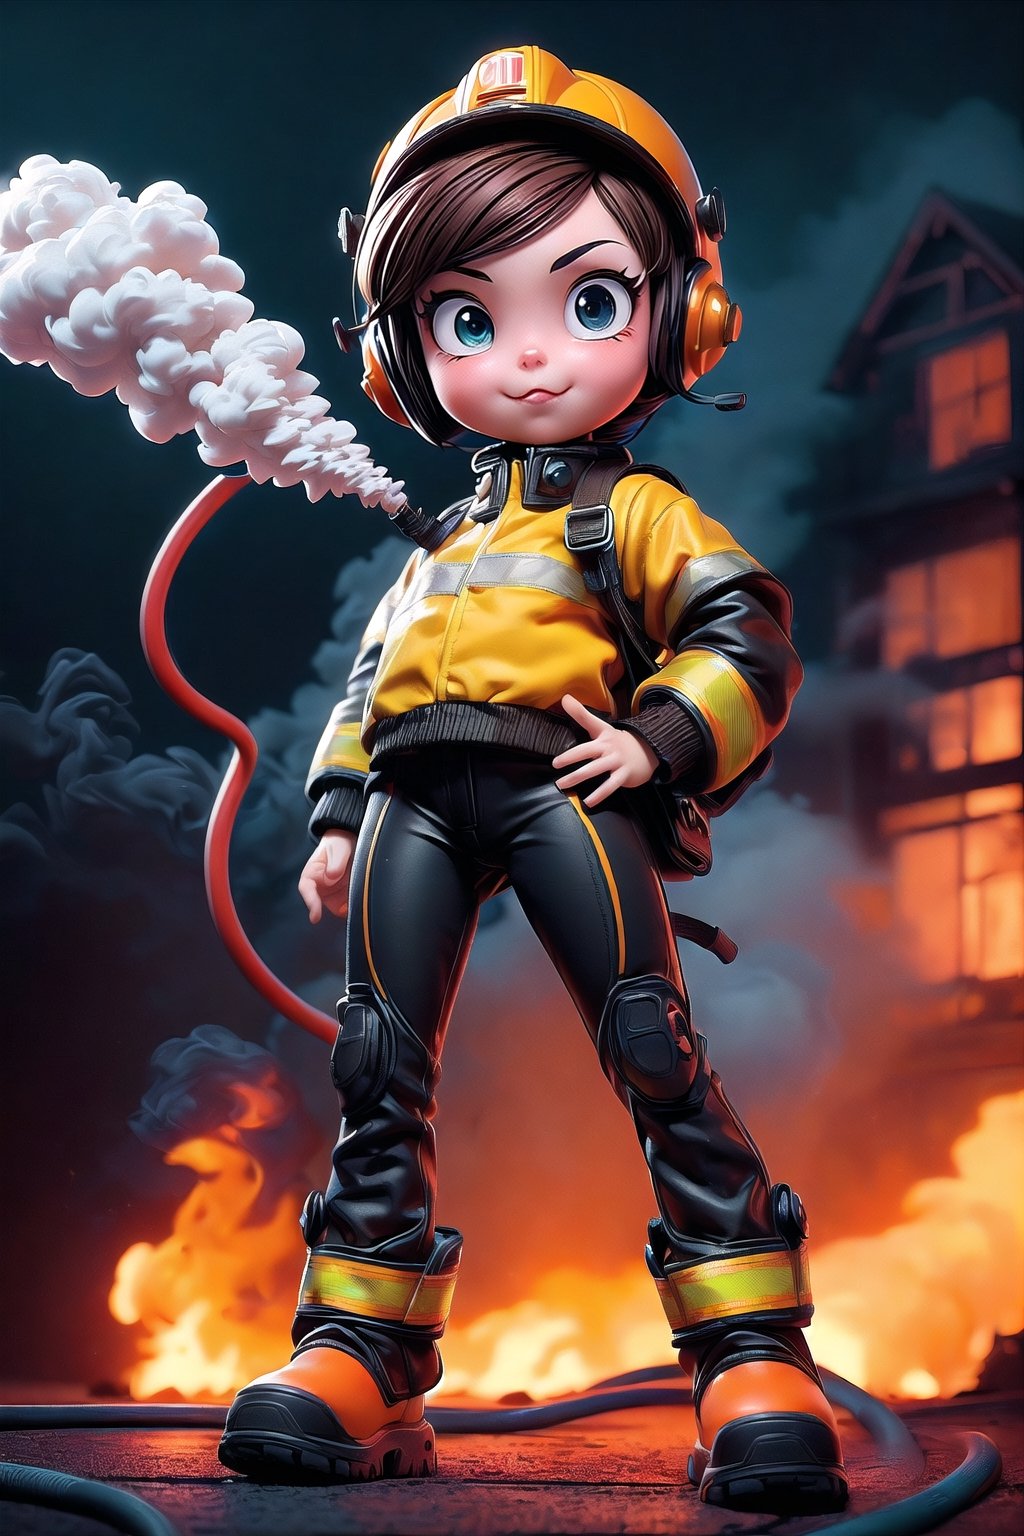 (detailed beautiful eyes and detailed face, masterpiece side light, masterpiece, best quality, detailed, high resolution illustration), ((2cute cartoon fireman back to back posing)), (future sense fireman:1.36), (short brown hair:1.38), (orange and yellow uniform:1.4), protection gear, armor, ((extra large helmet)), beautiful big eyes, fire scene background, ultra blur background, holding fire hose, front_view,  ((extra big head:1.5)), ((extra short body:1.5)), ((cool pose:1.38)), ((heavy dust and smoke environment)), dynamic light on body, ((front view)),(full body), urban techwear,C7b3rp0nkStyle,3DMM,l4tex4rmor,PD-802,mecha musume,halloweentech ,urban techwear